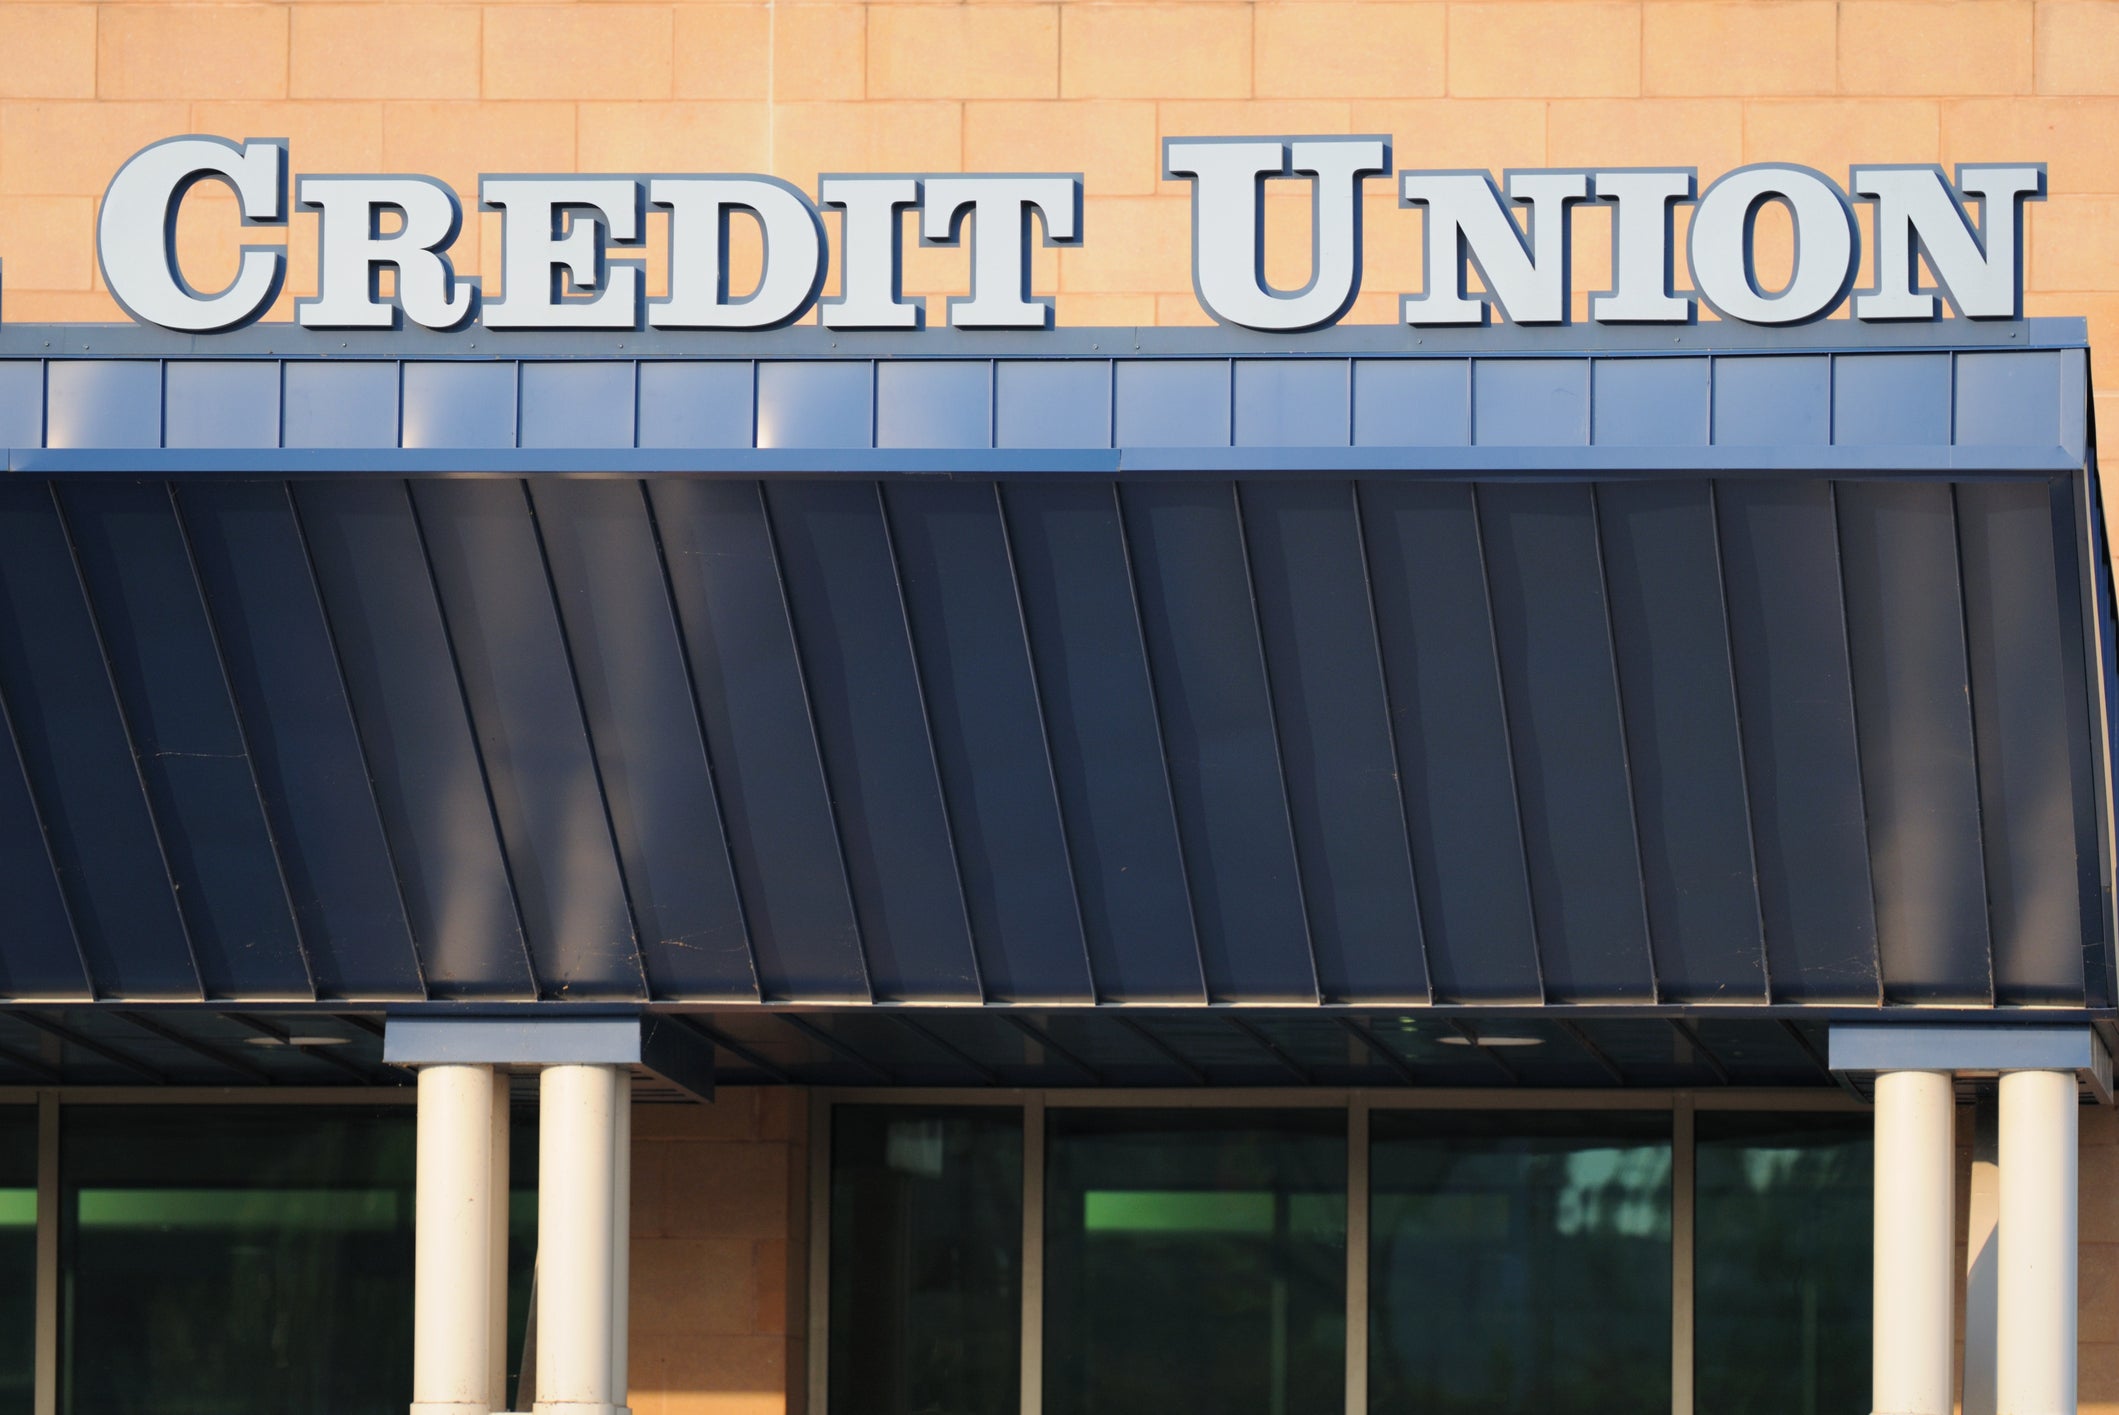 Navy Federal Credit Union Has Reportedly Been Denying Black Home Loan-Seekers Significantly More Than Whites